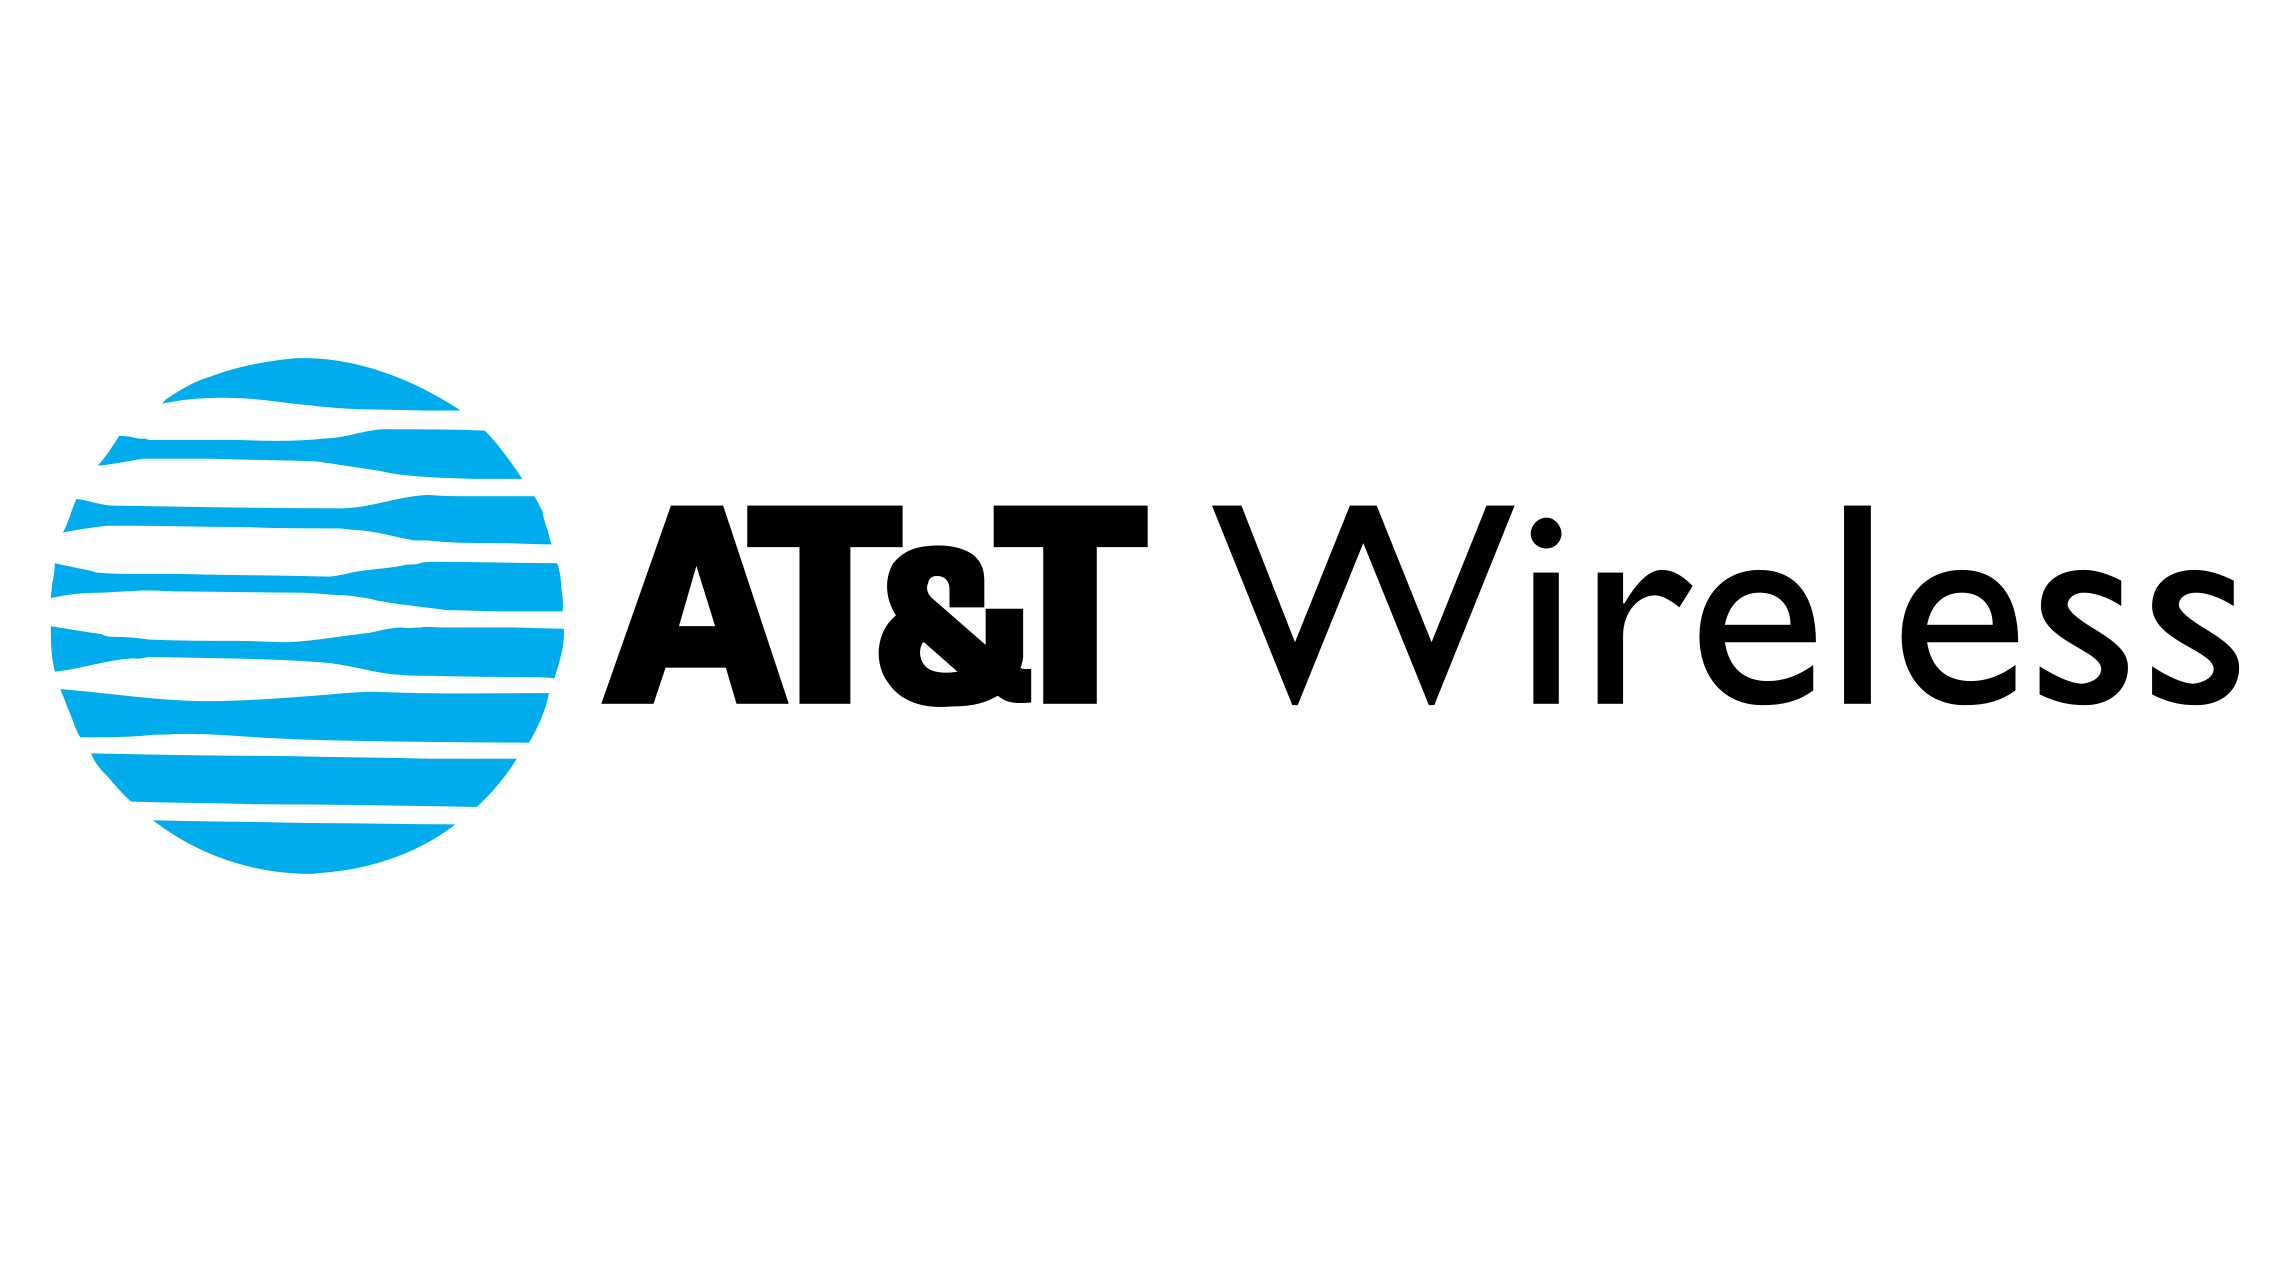 AT&T WIRELESS BENEFITS